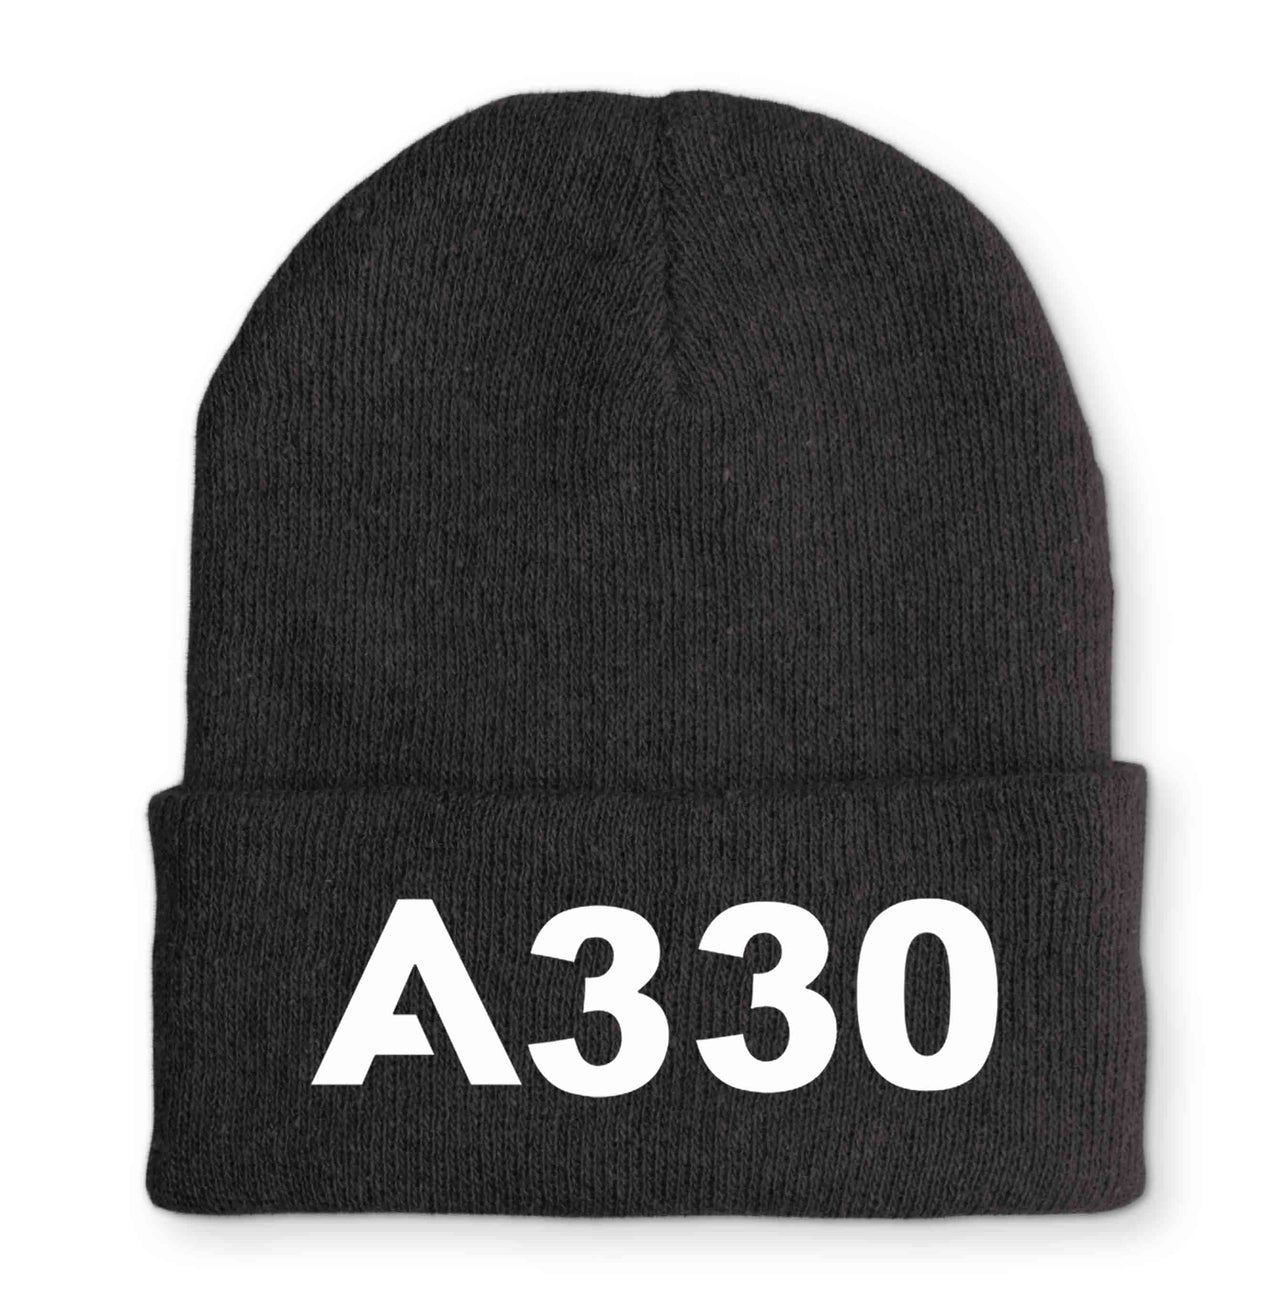 A330 Flat Text Embroidered Beanies